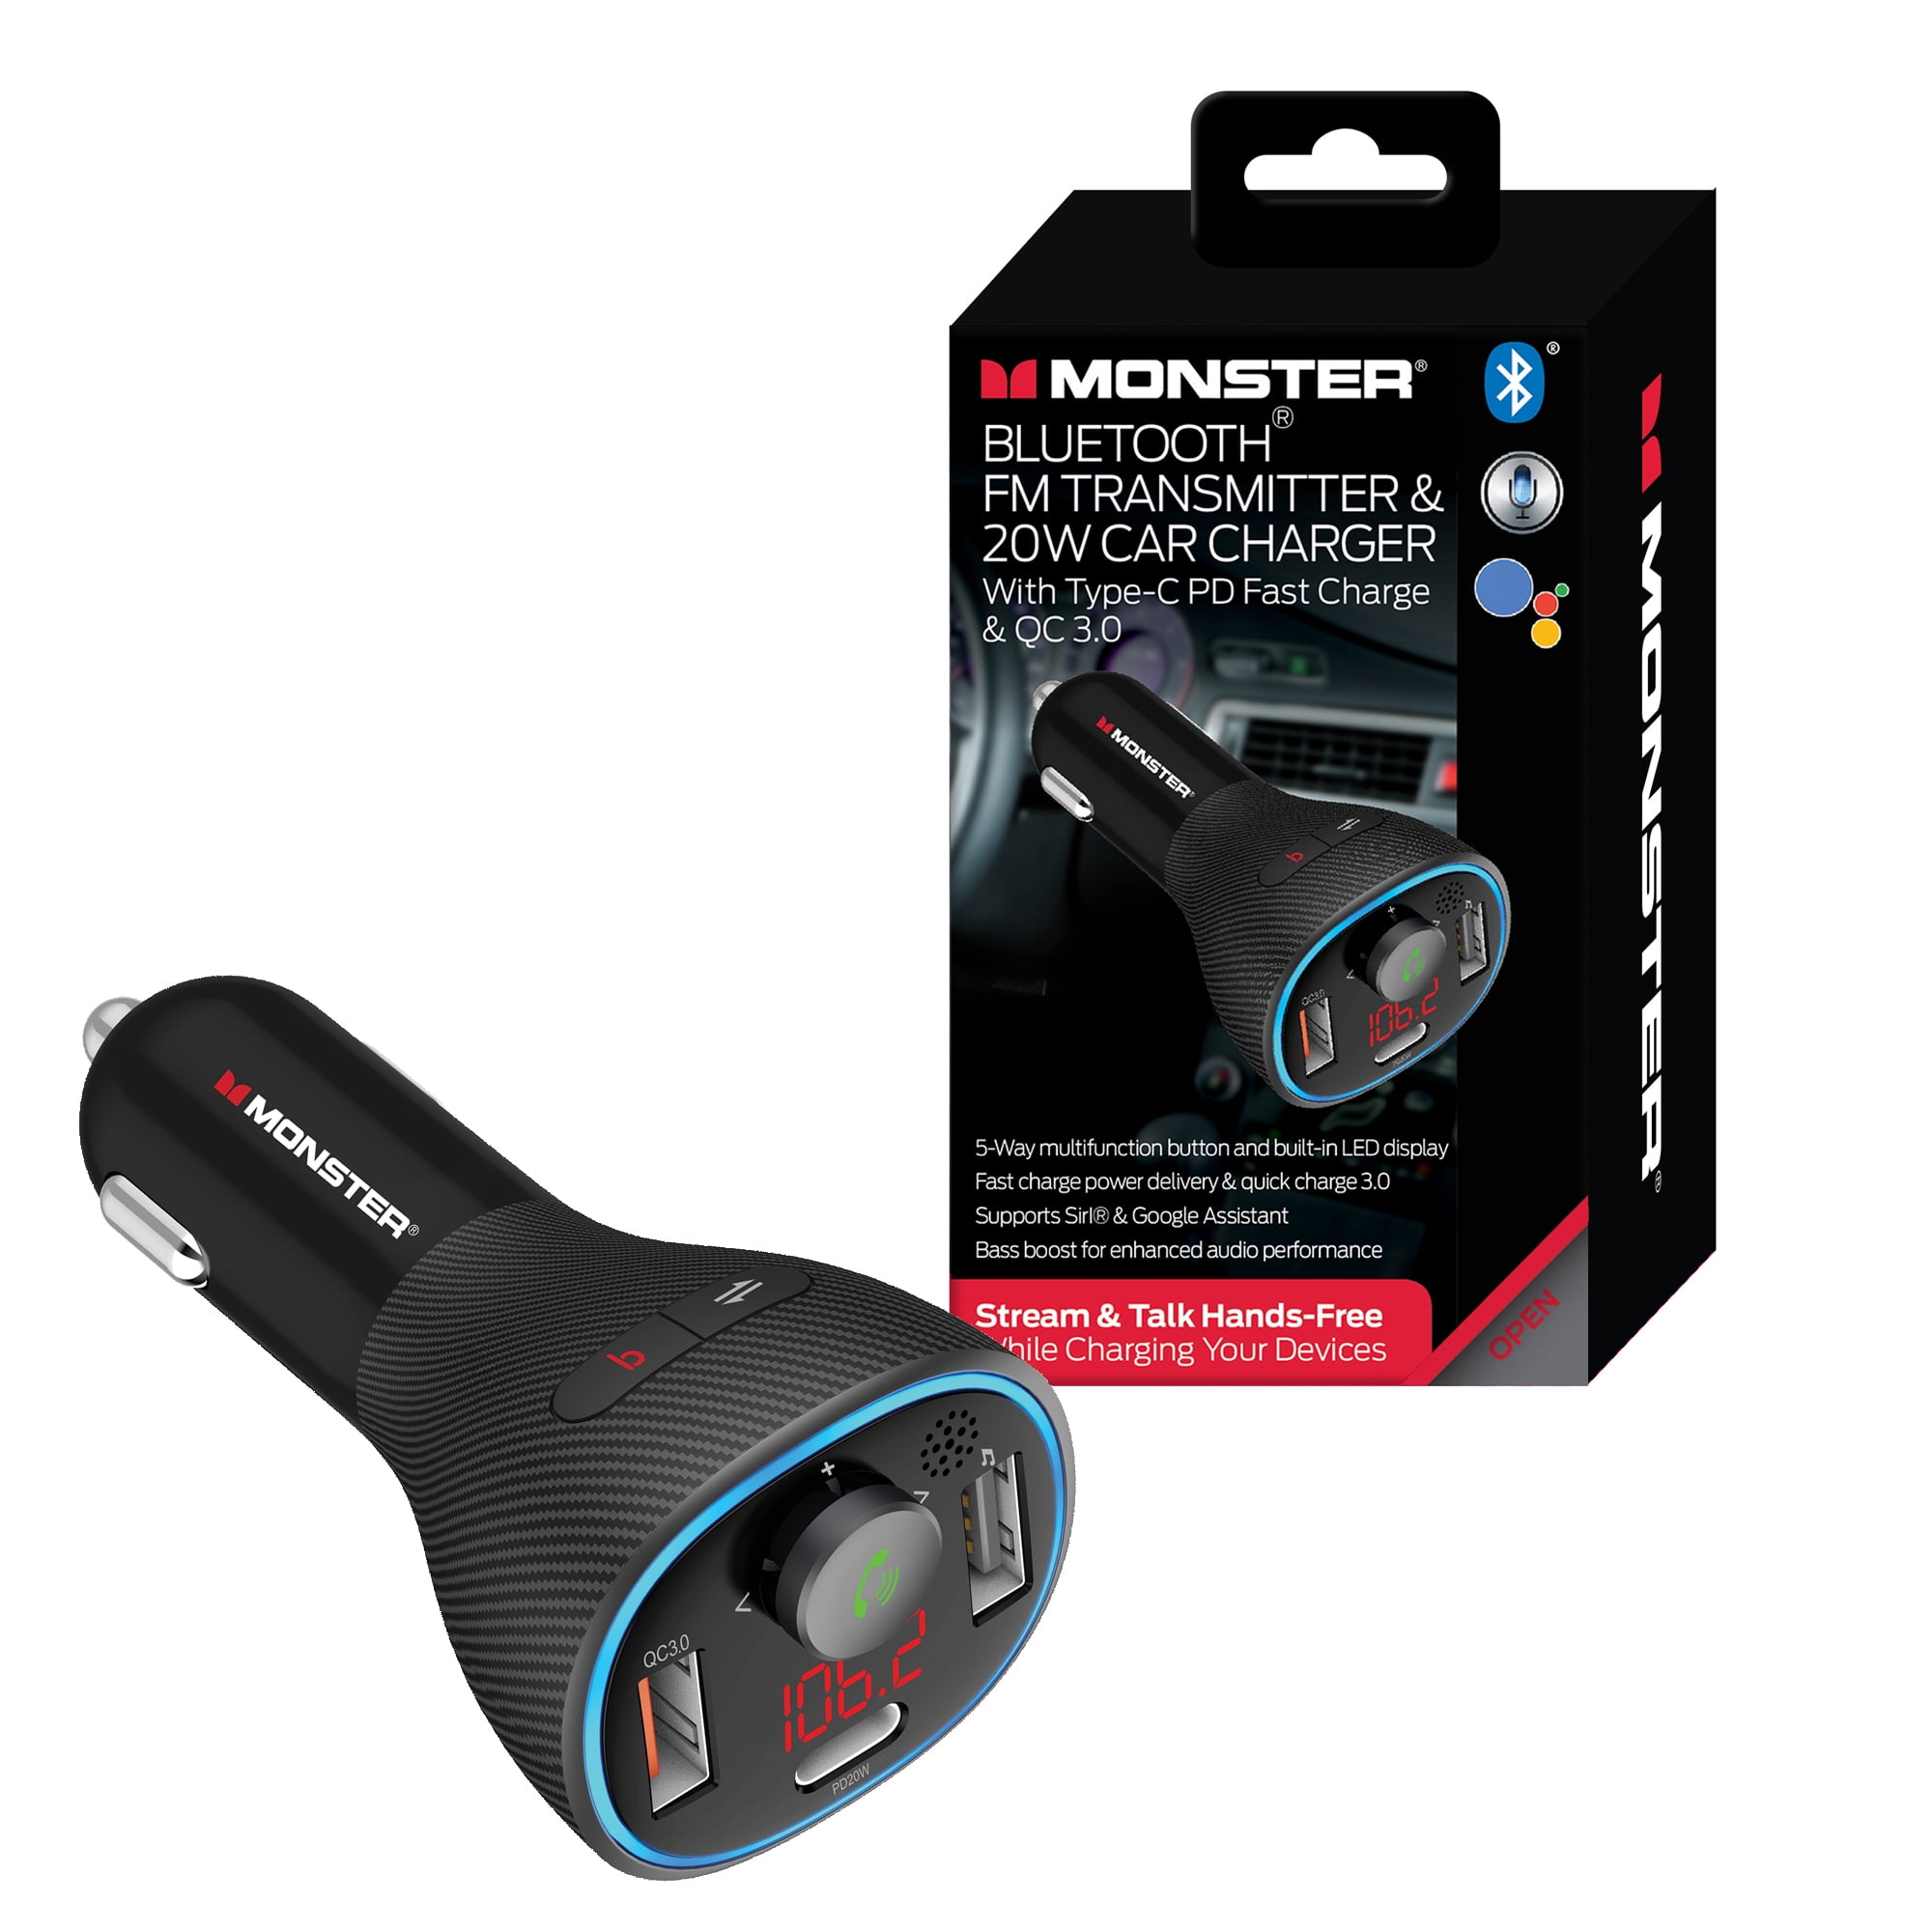 Monster Bluetooth FM Transmitter with Dual Charging, 20W PD Type-C and QC 3.0 USB